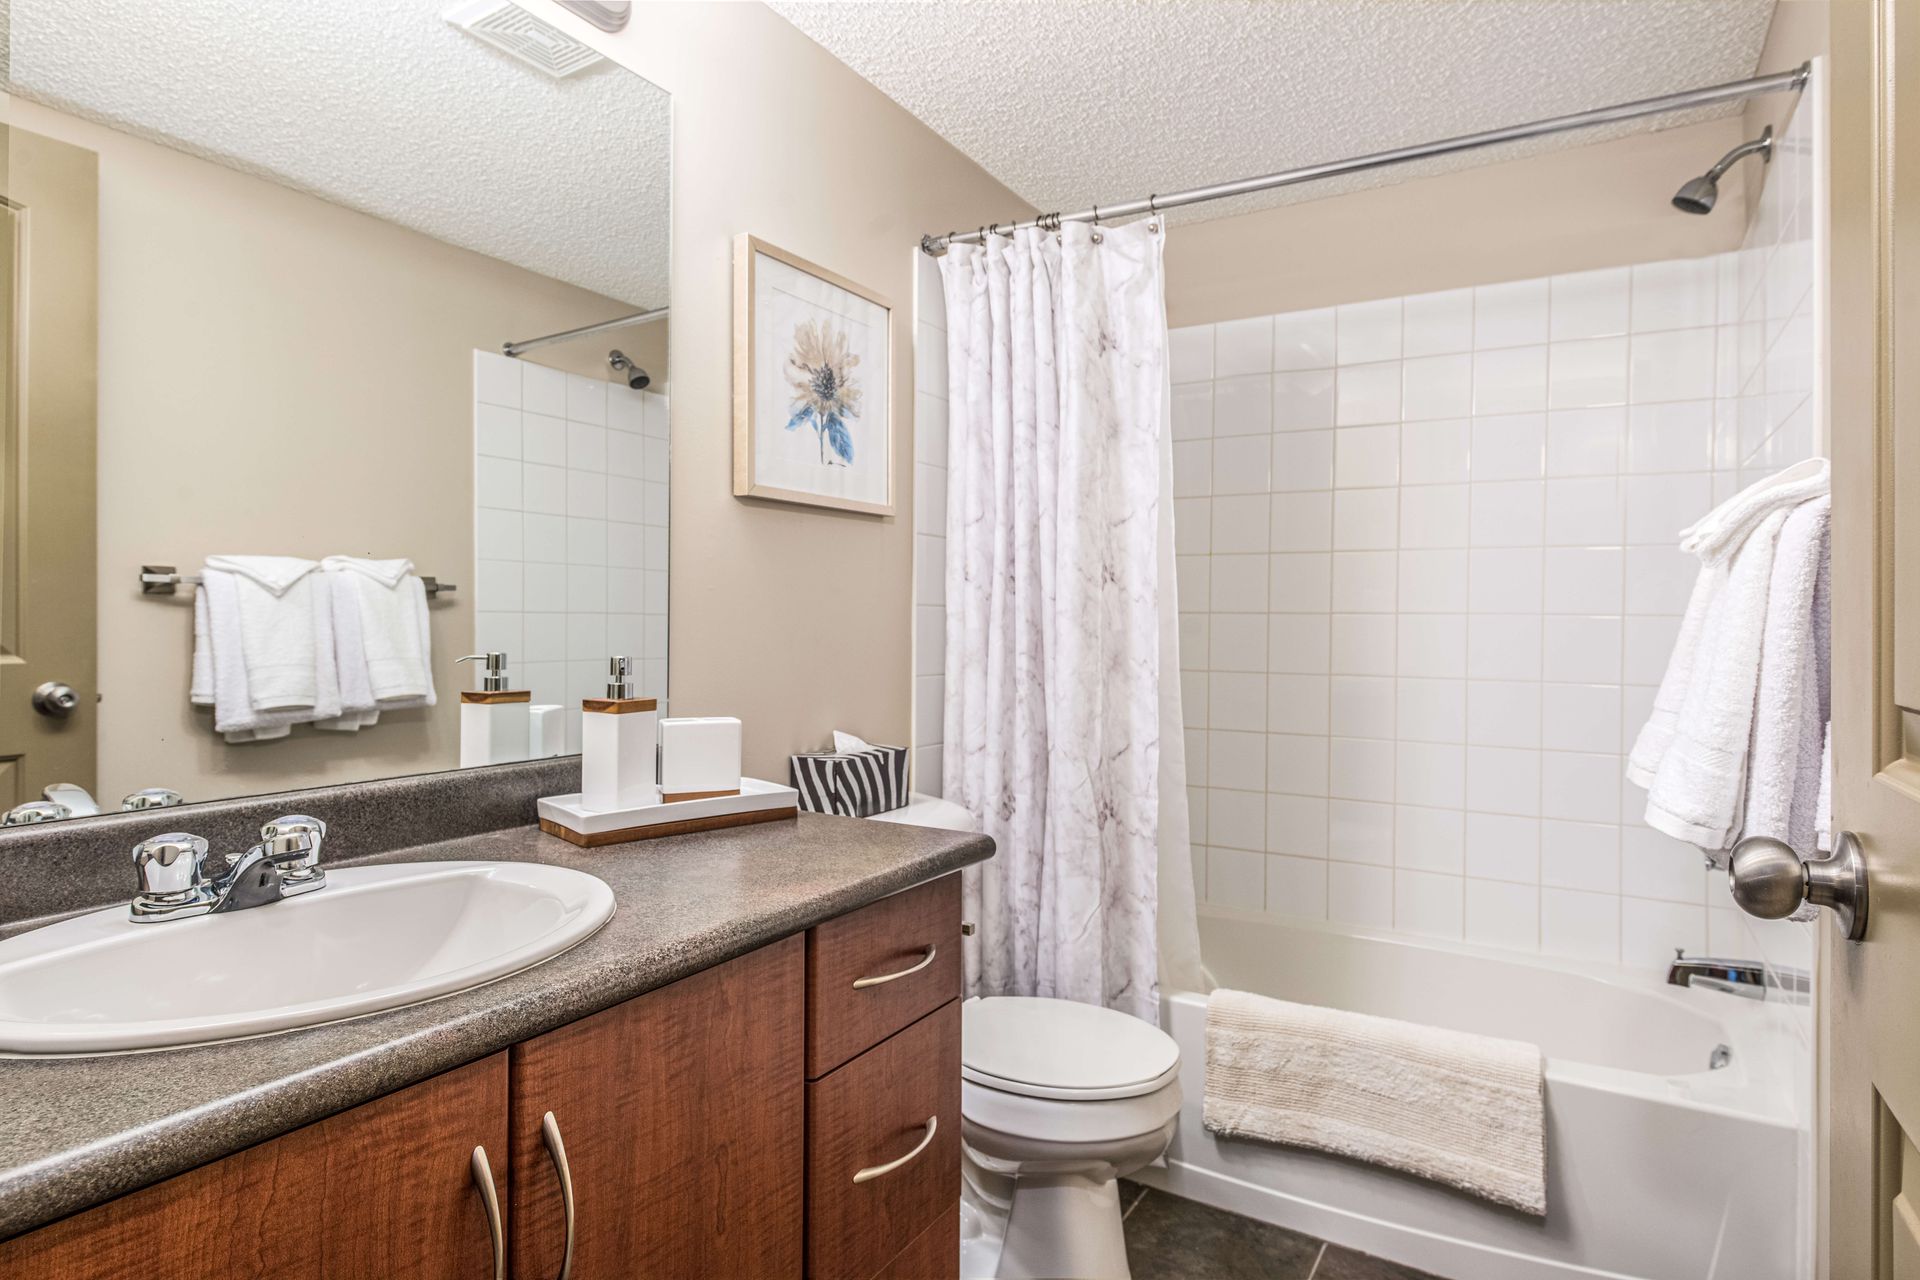 Ensuite at the Lake Windermere Pointe Condos in Invermere, BC managed by Aisling Baile Property Management